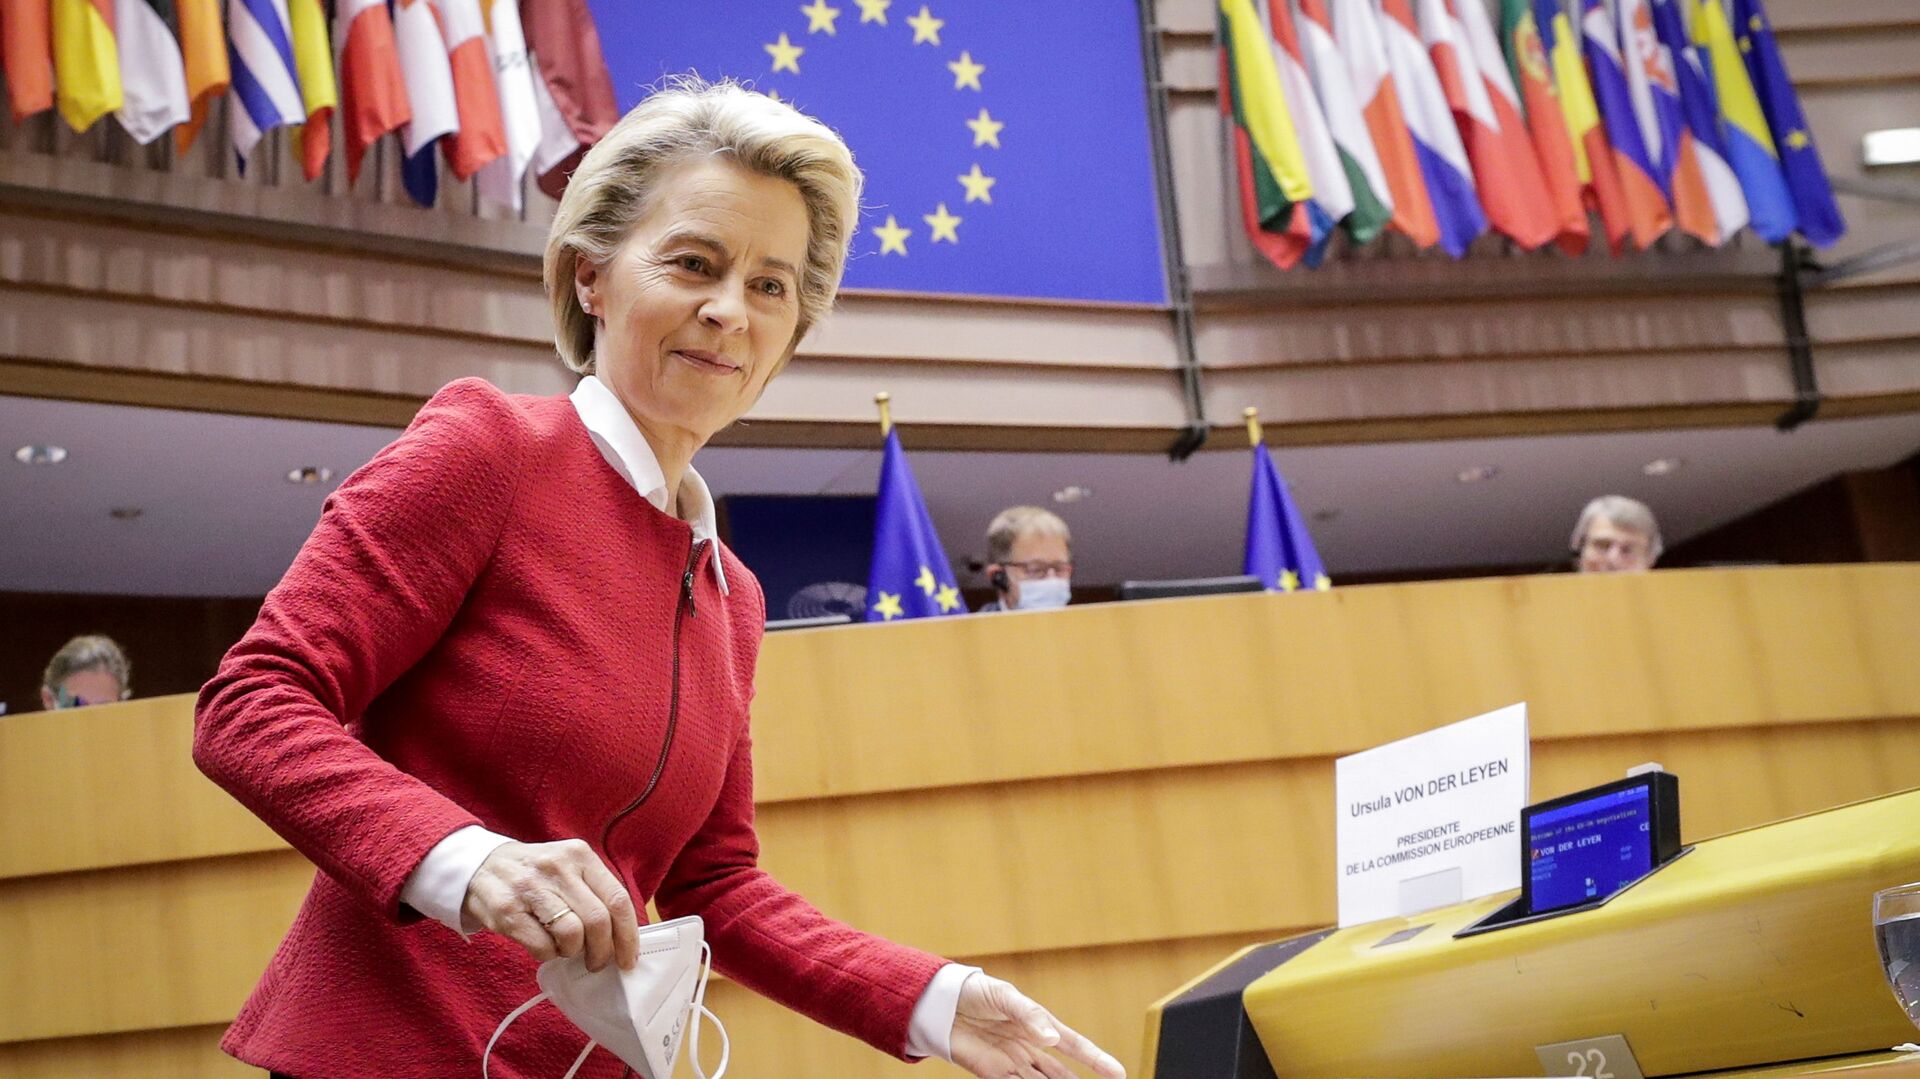 European Commission President Ursula von der Leyen attends the debate on EU-UK trade and cooperation agreement during the second day of a plenary session at the European Parliament in Brussels, Belgium April 27, 2021 - Sputnik International, 1920, 15.09.2021